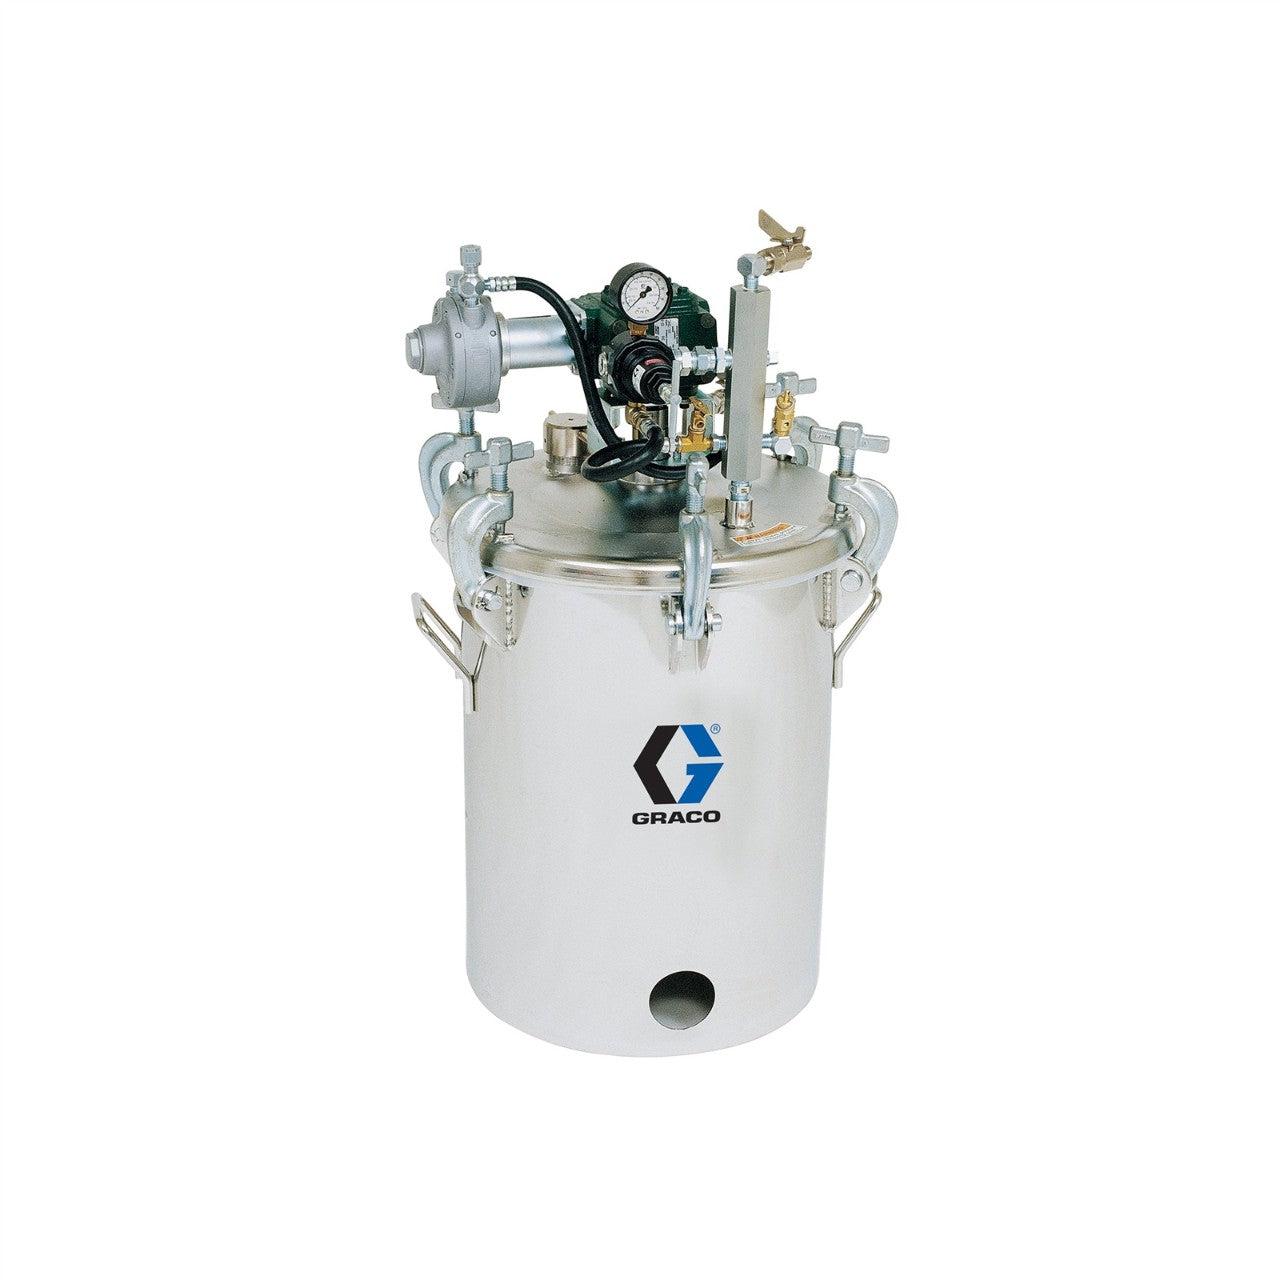 5 Gallon Low Pressure (HVLP) Pot with Agitator, Regulated to 15 psi, ASME Rated, 30.5 in (77.5 cm), 74 lbs (34 kg), SST